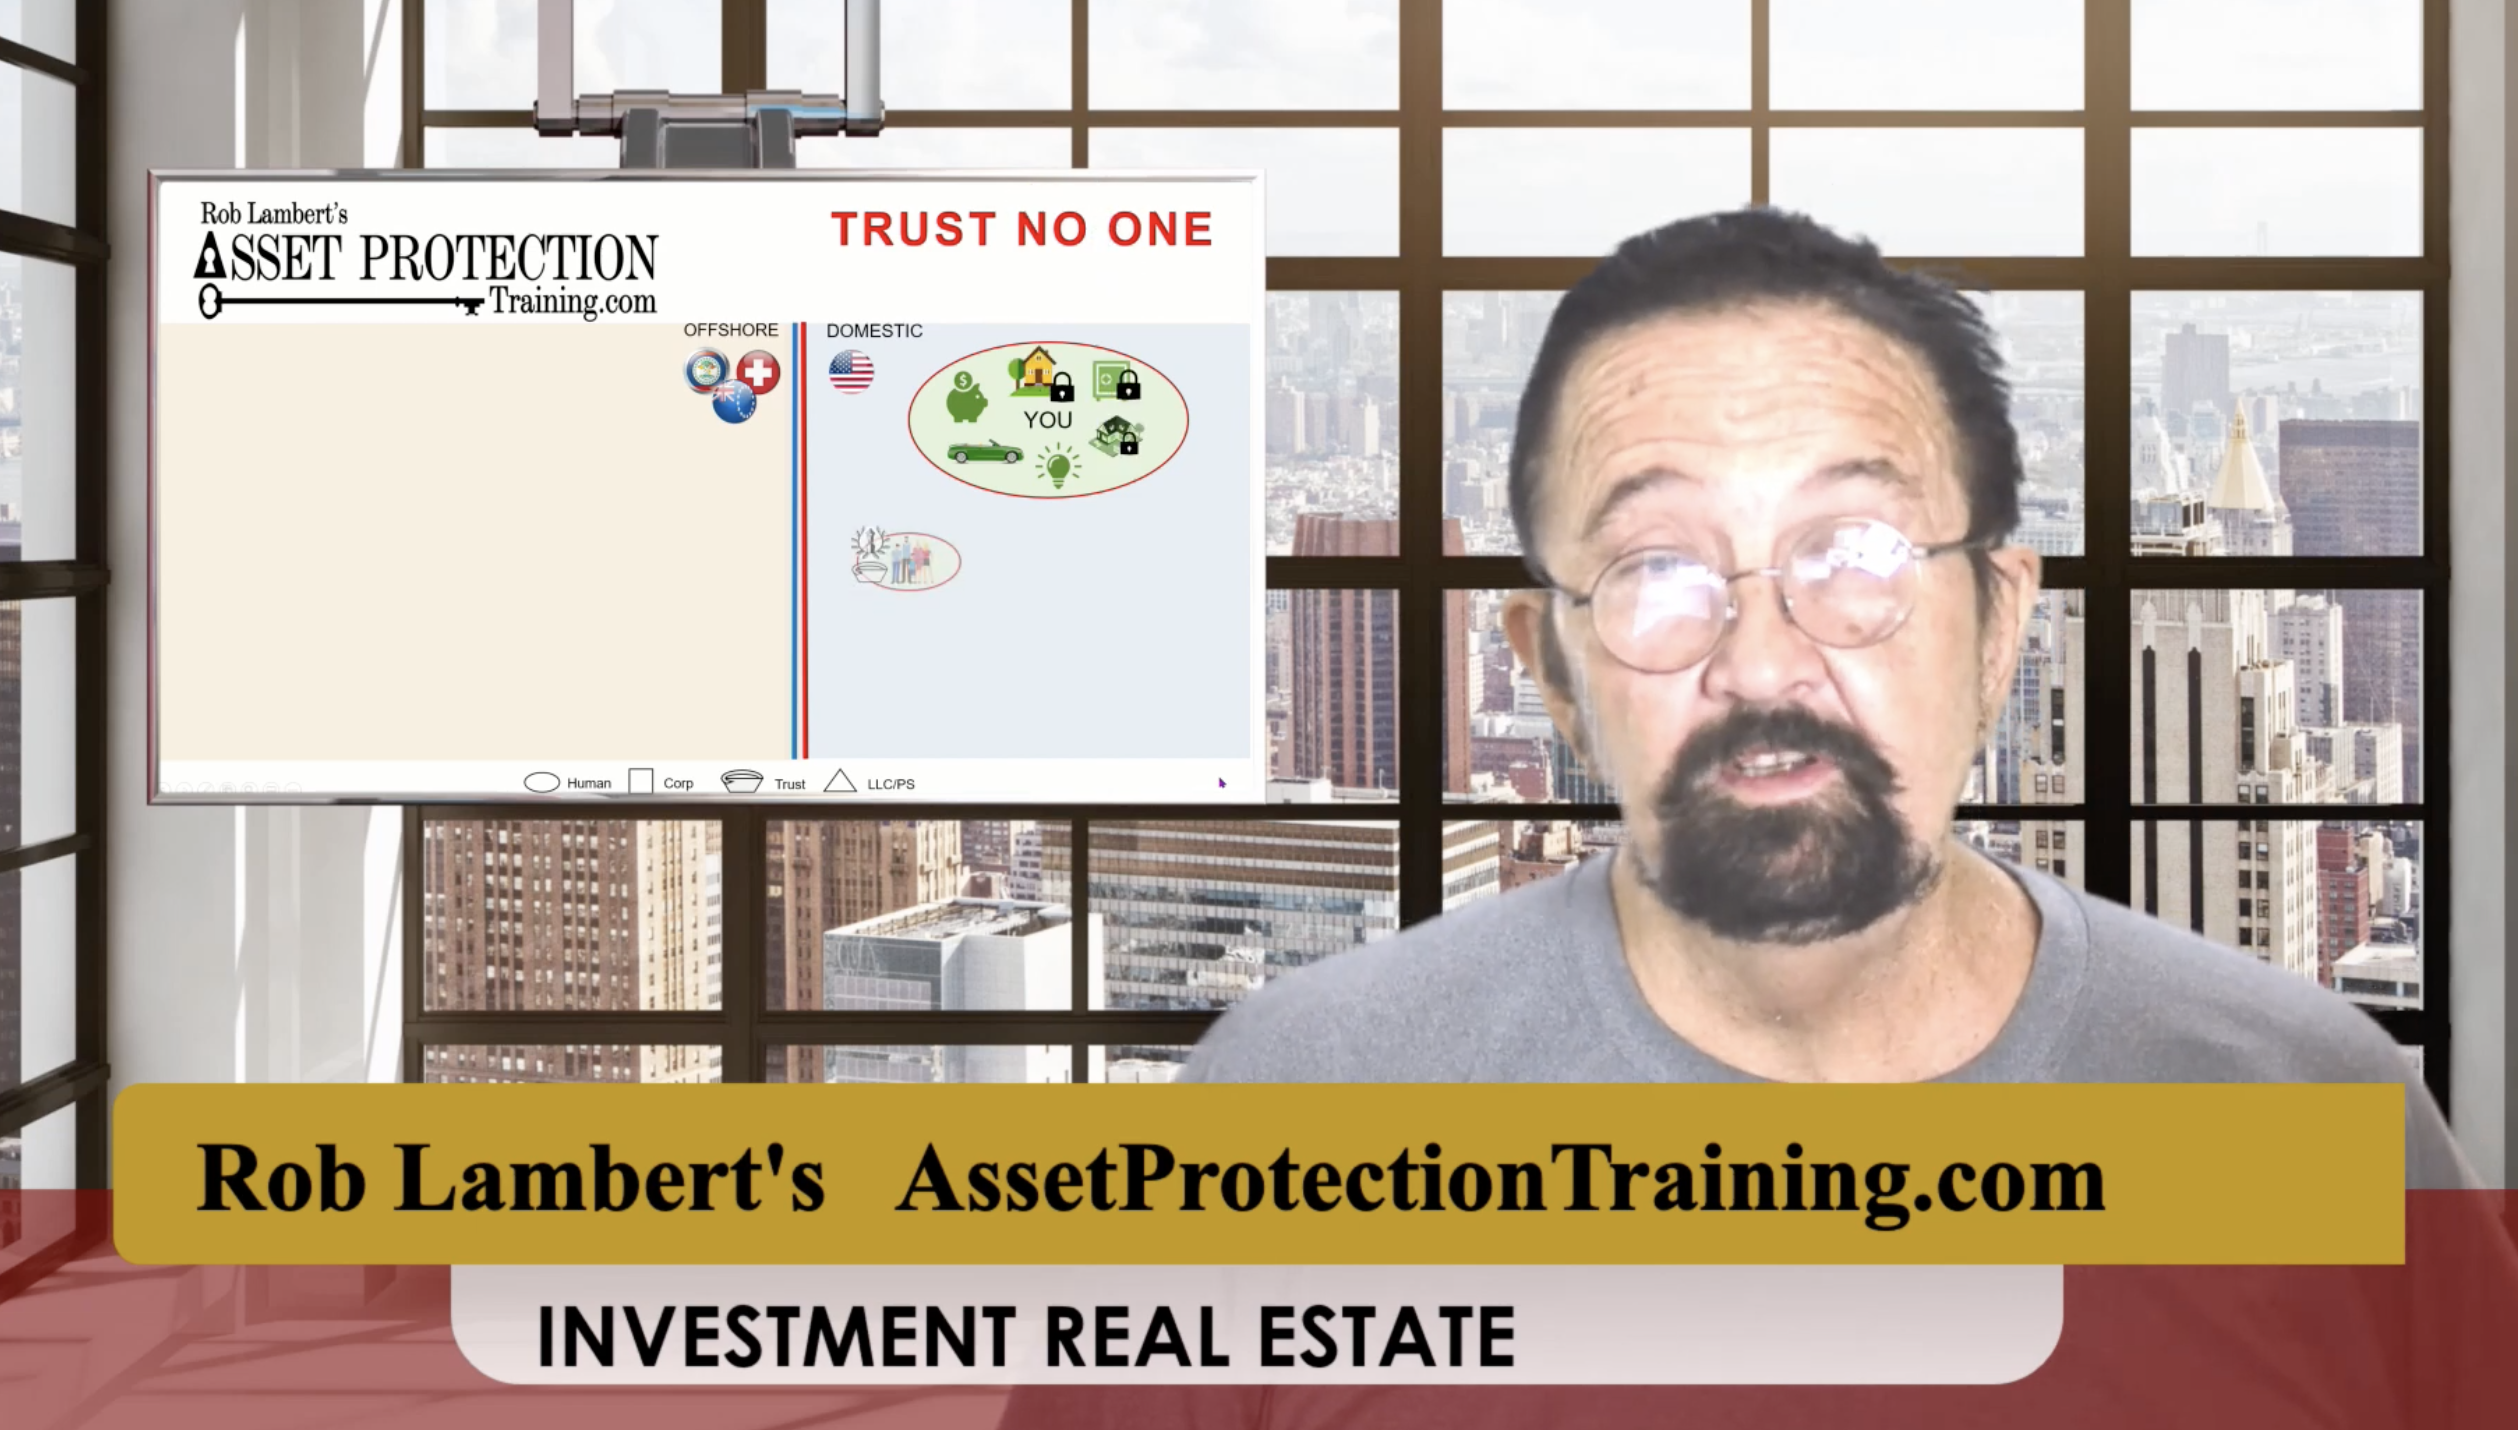 PROTECTING INVESTMENT REAL ESTATE